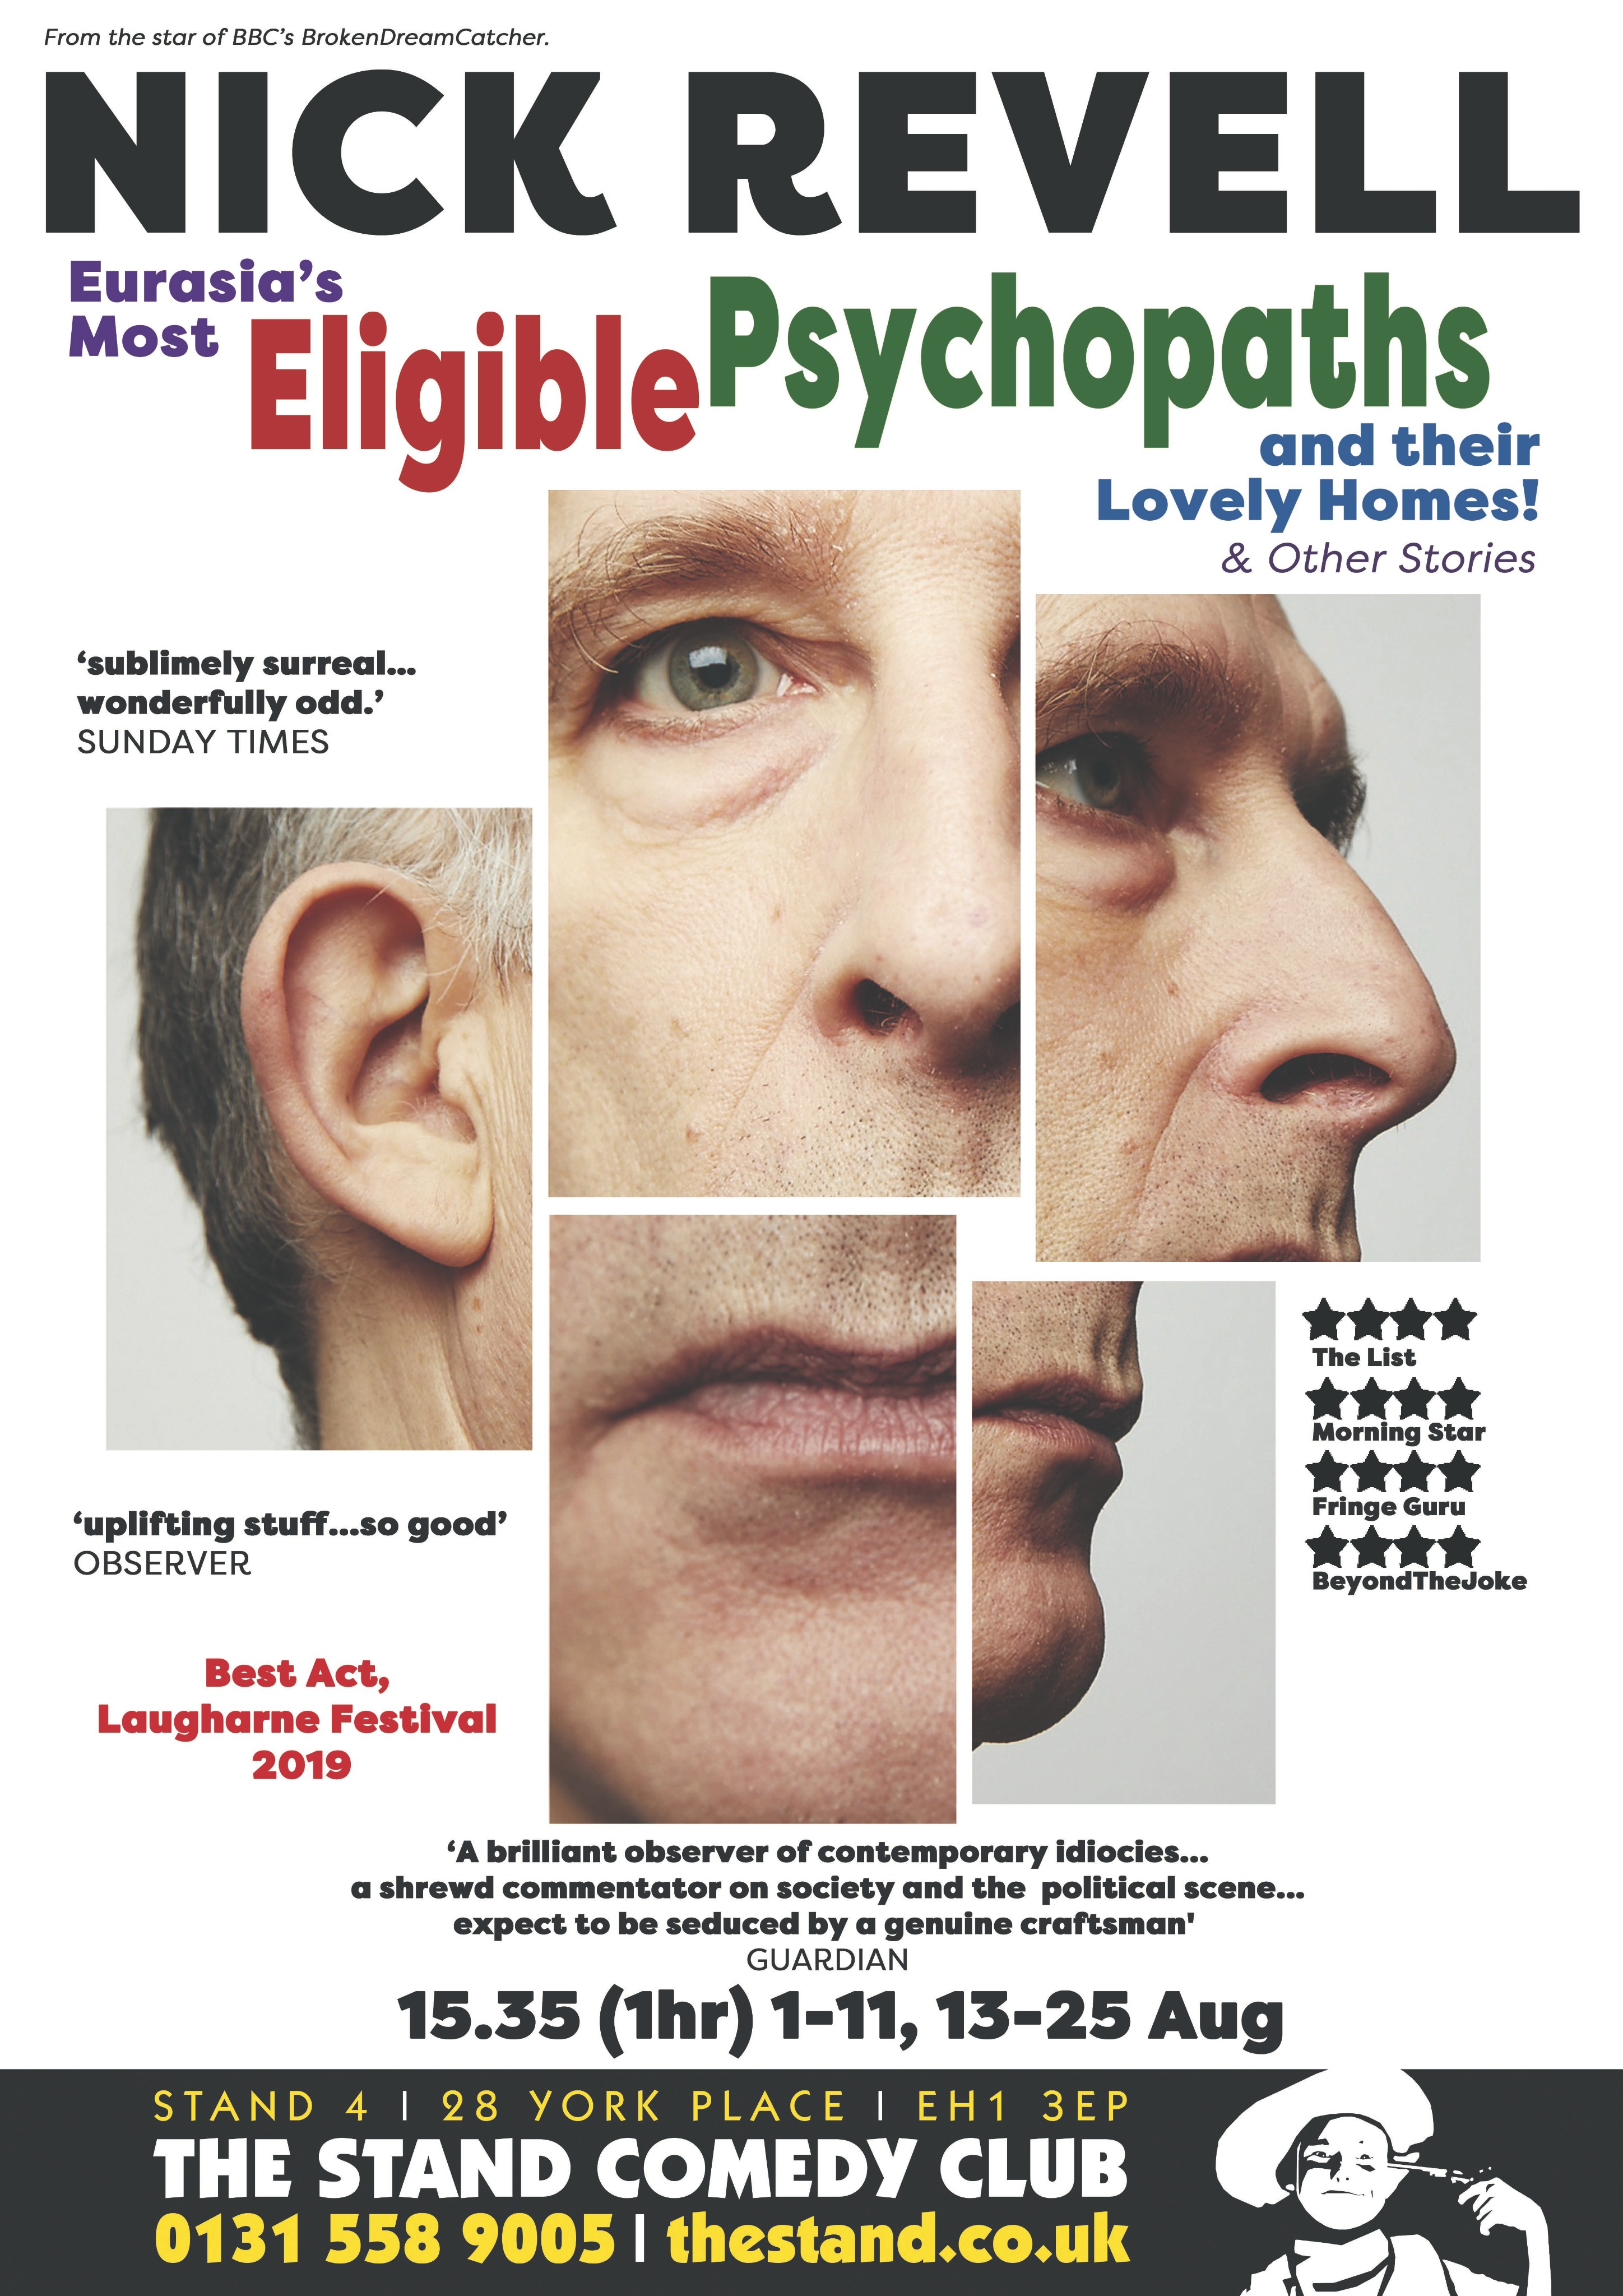 The poster for Nick Revell: Eurasia's Most Eligible Psychopaths and Their Lovely Homes